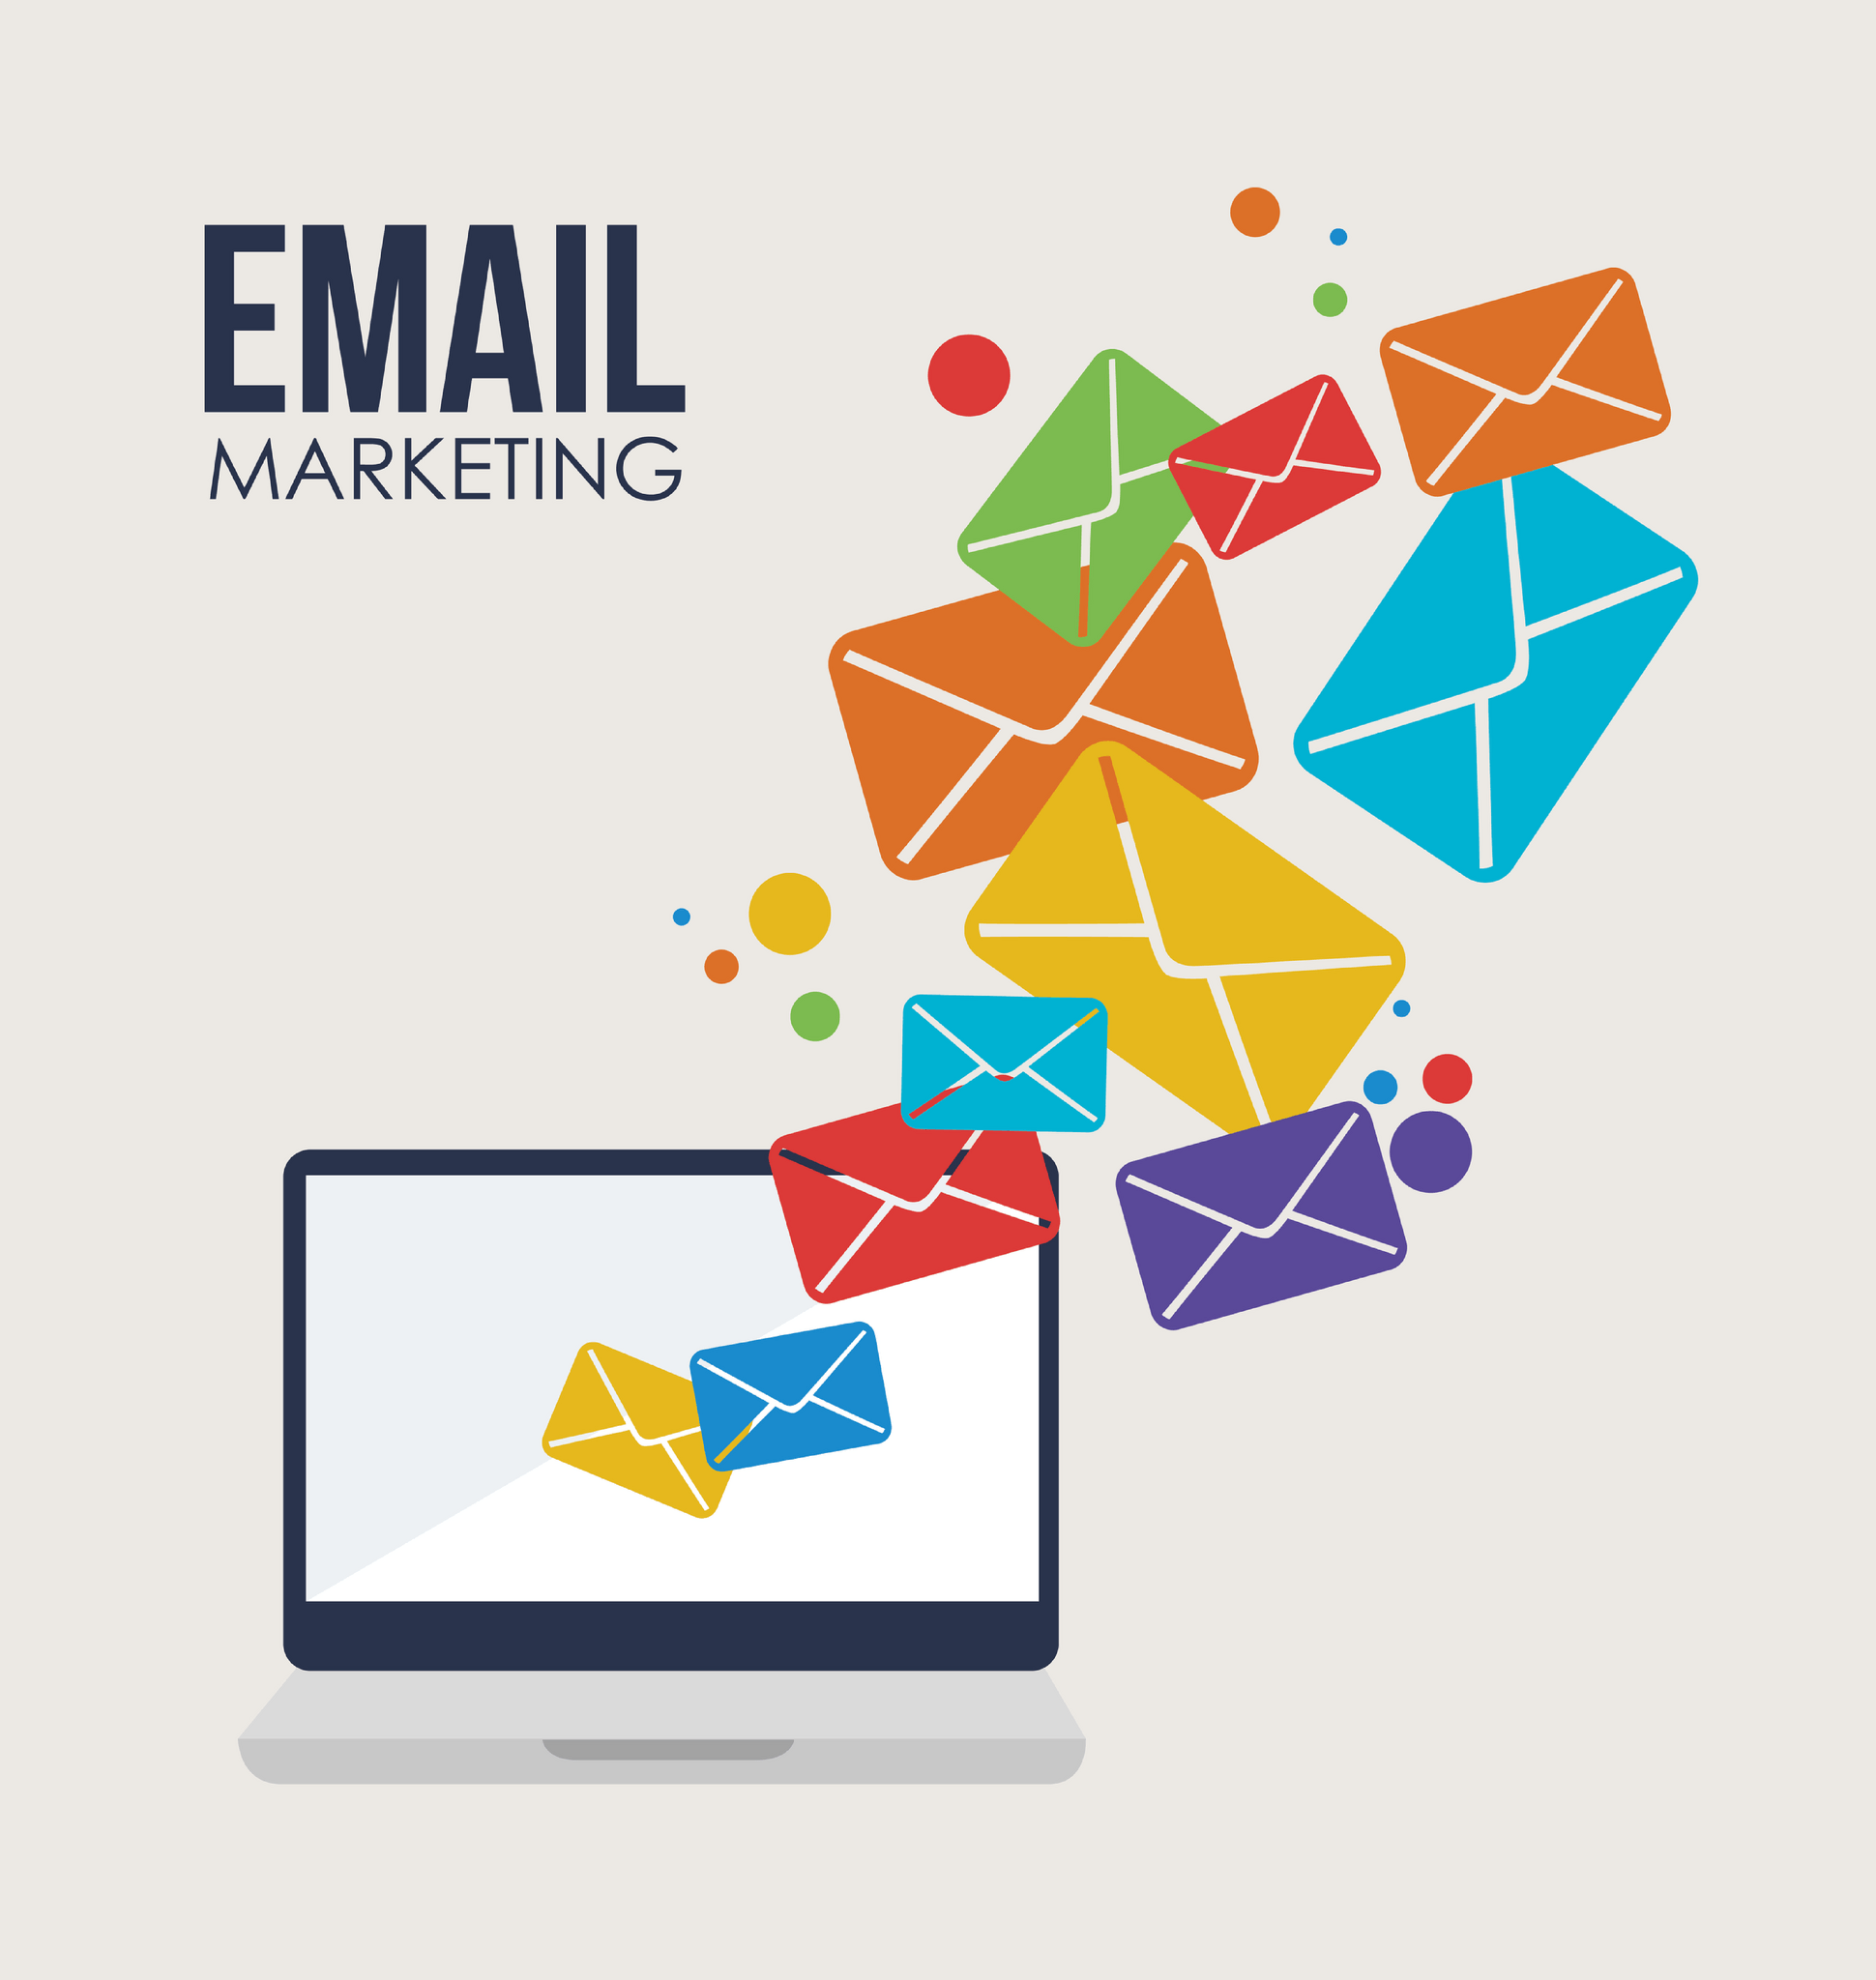 Psychology meets email marketing: The best-seller effect